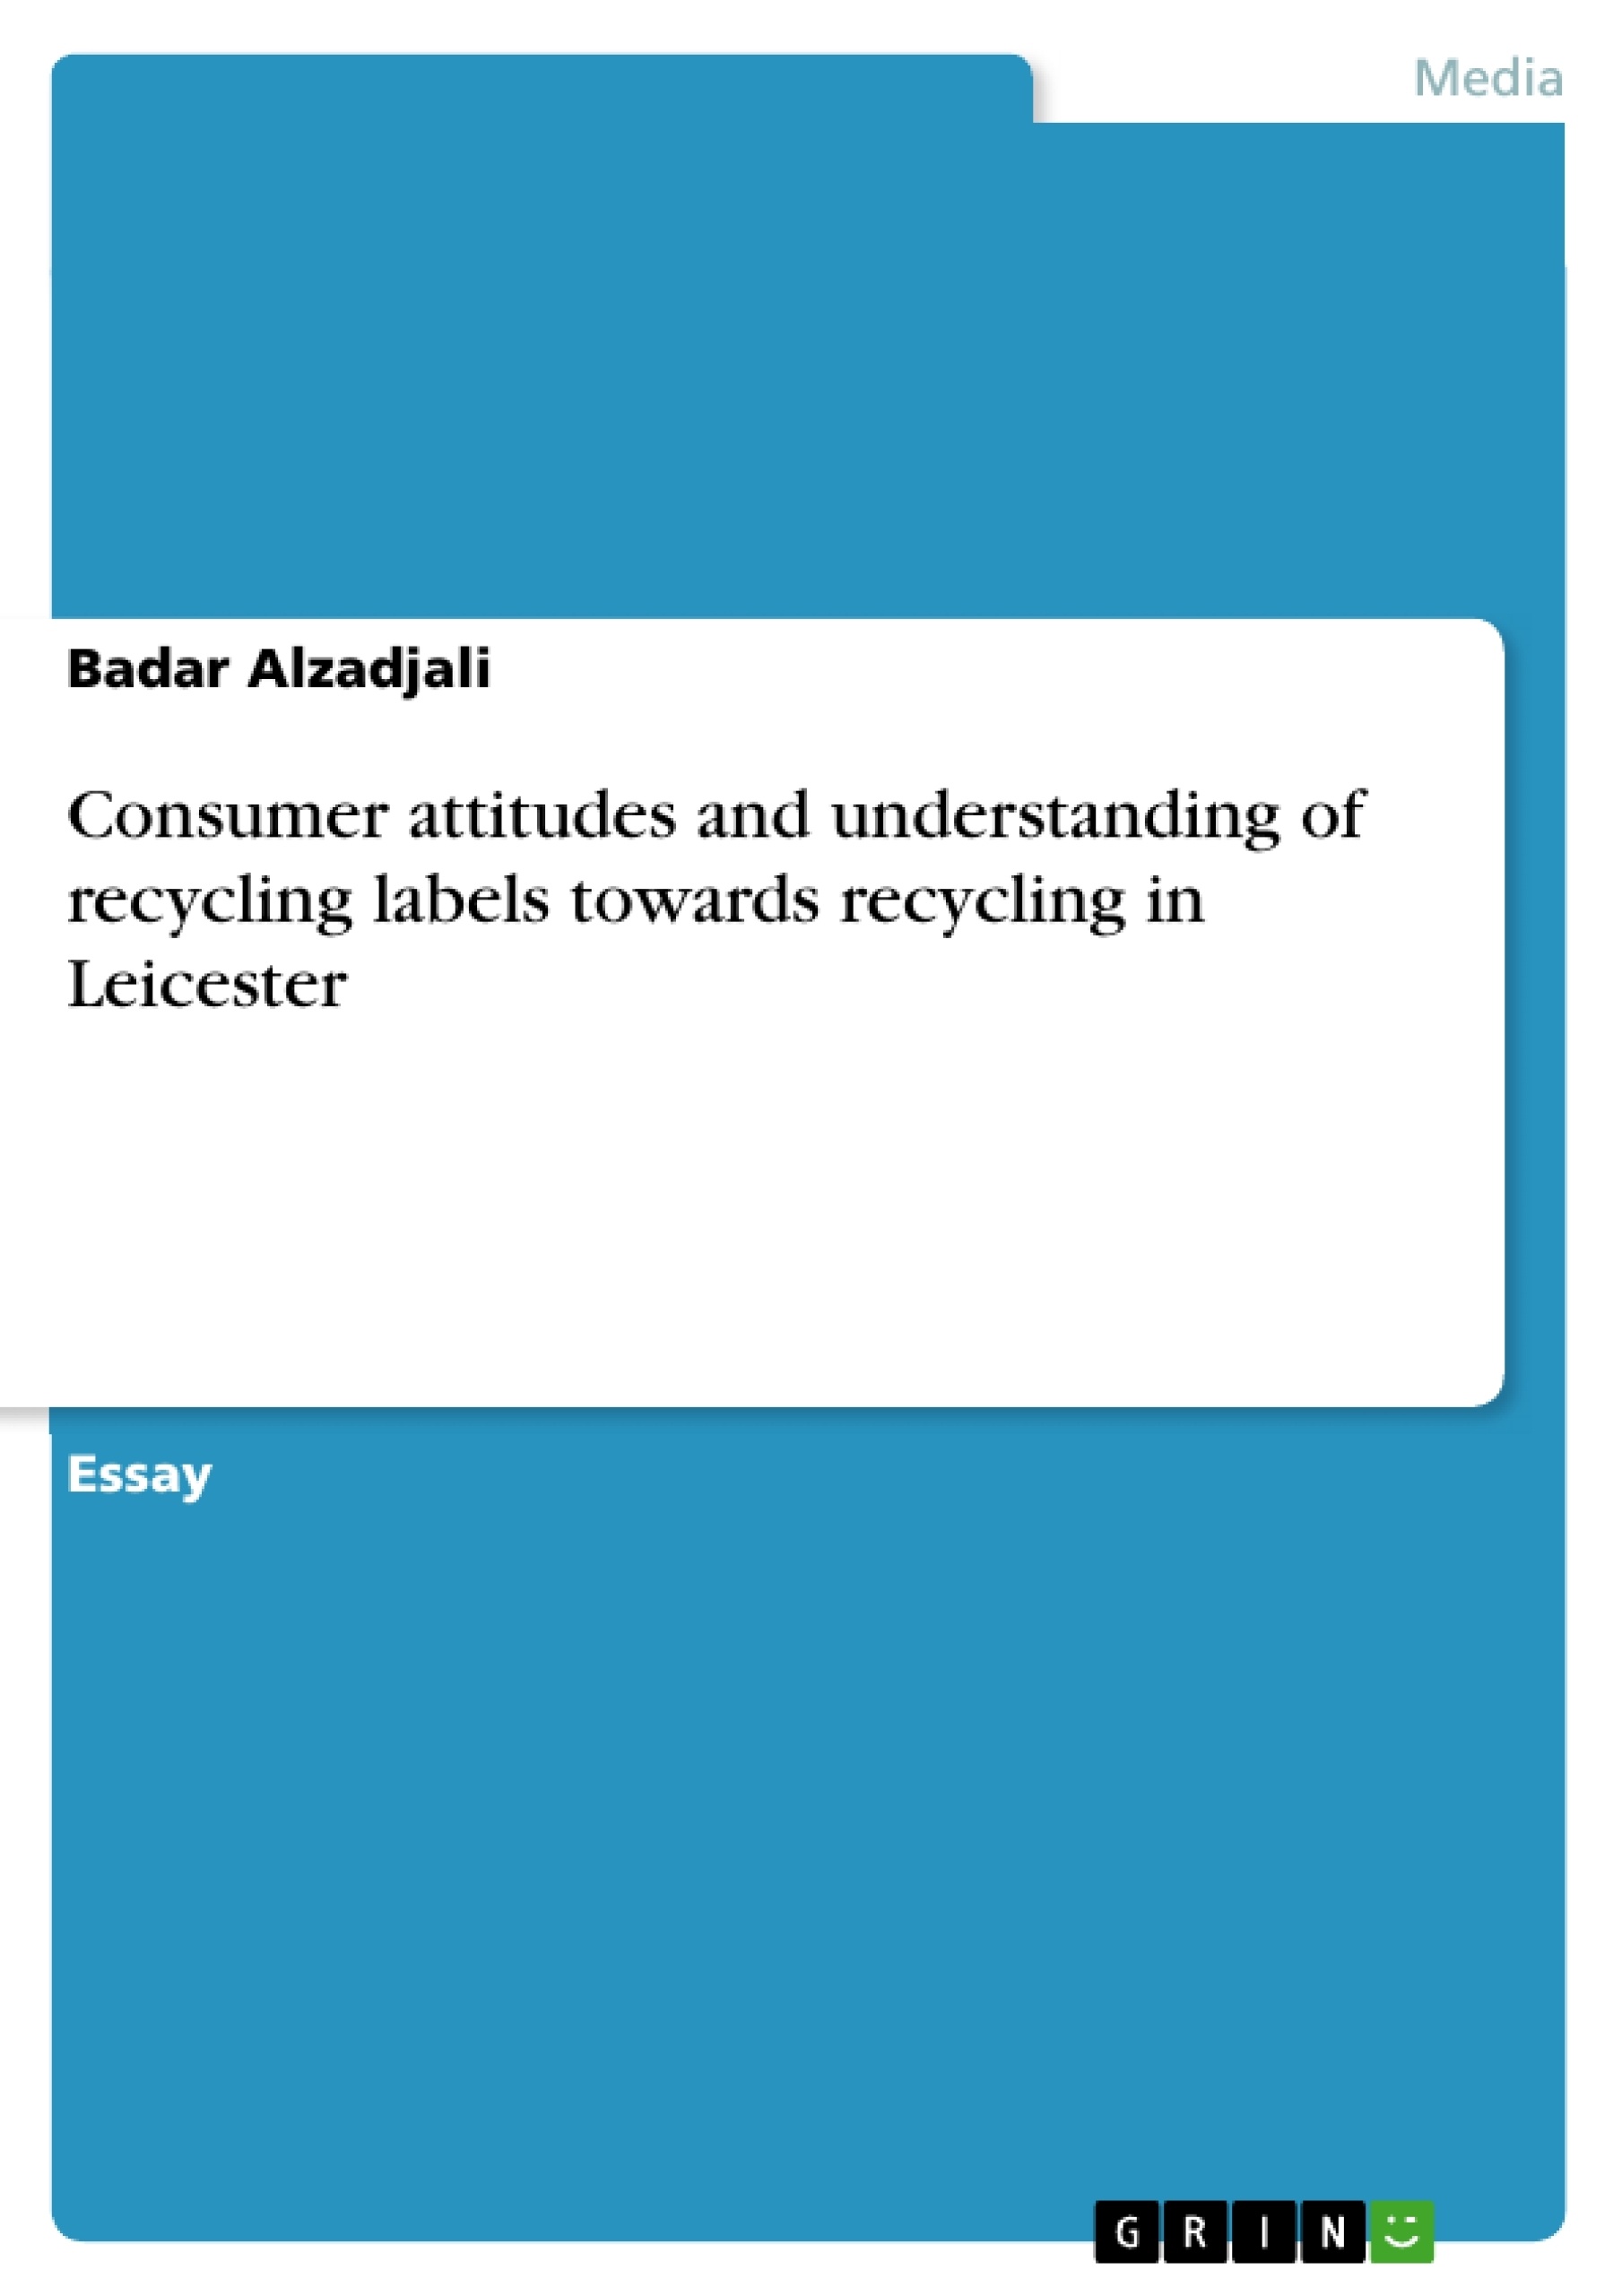 Title: Consumer attitudes and understanding of recycling labels towards recycling in Leicester